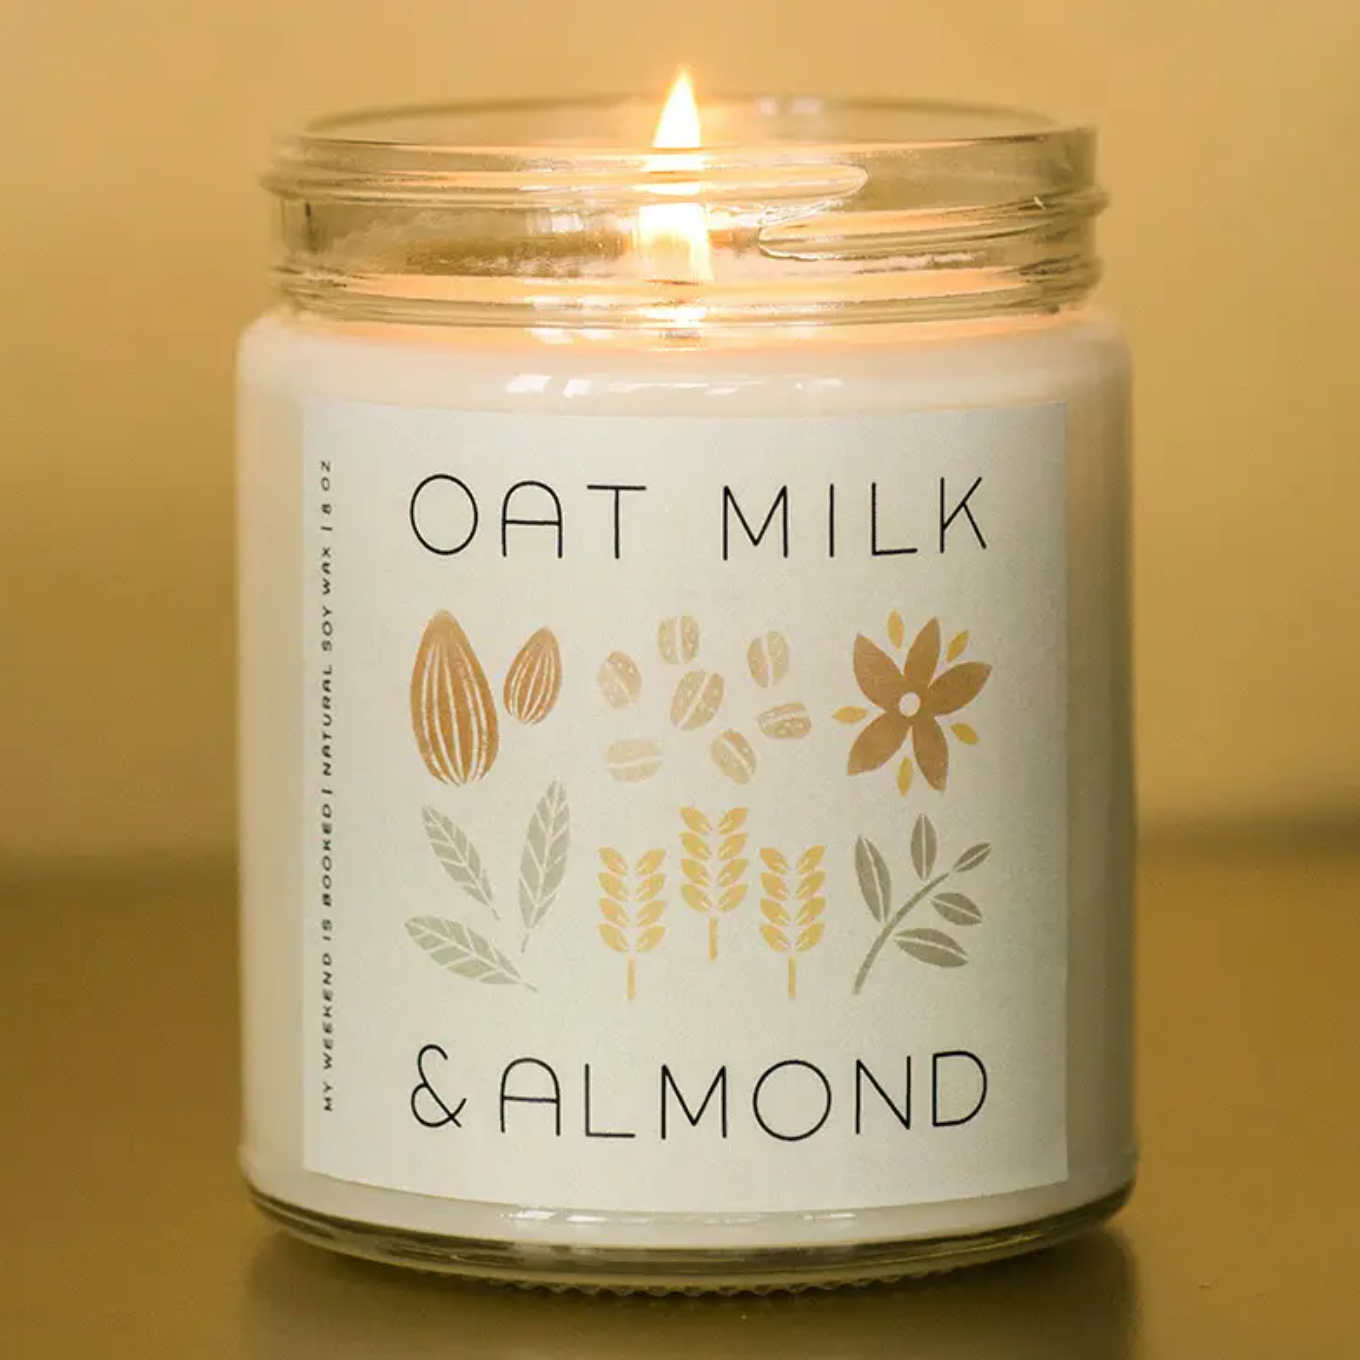 oat milk & almond soy candle